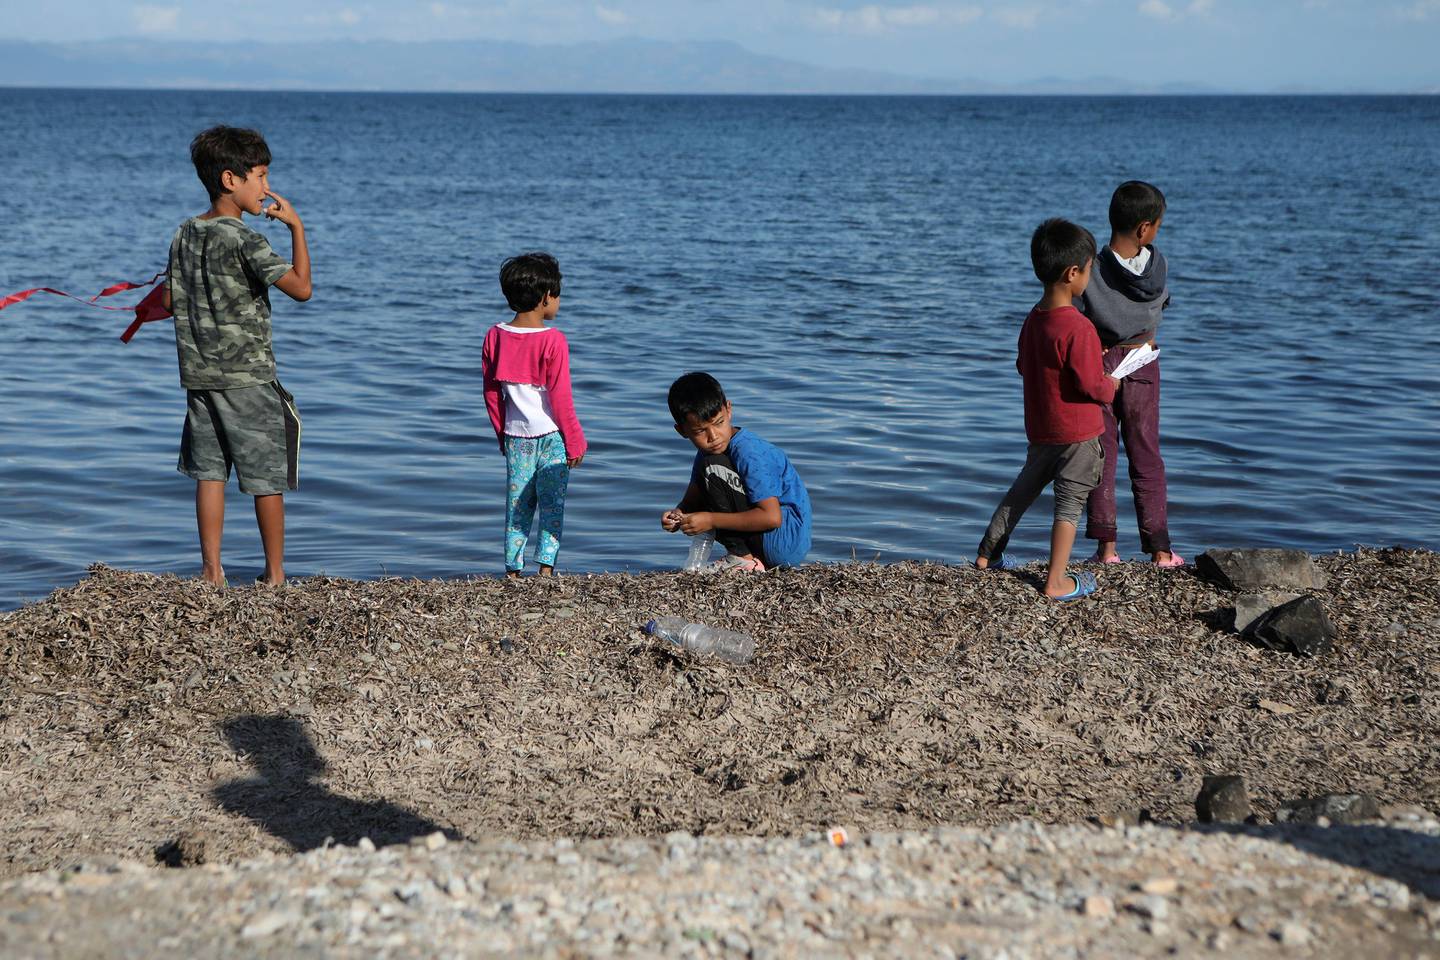 FILE PHOTO: Children stand next to the sea at the Kara Tepe camp for refugees and migrants on the island of Lesbos, Greece, October 14, 2020. REUTERS/Elias Marcou/File Photo